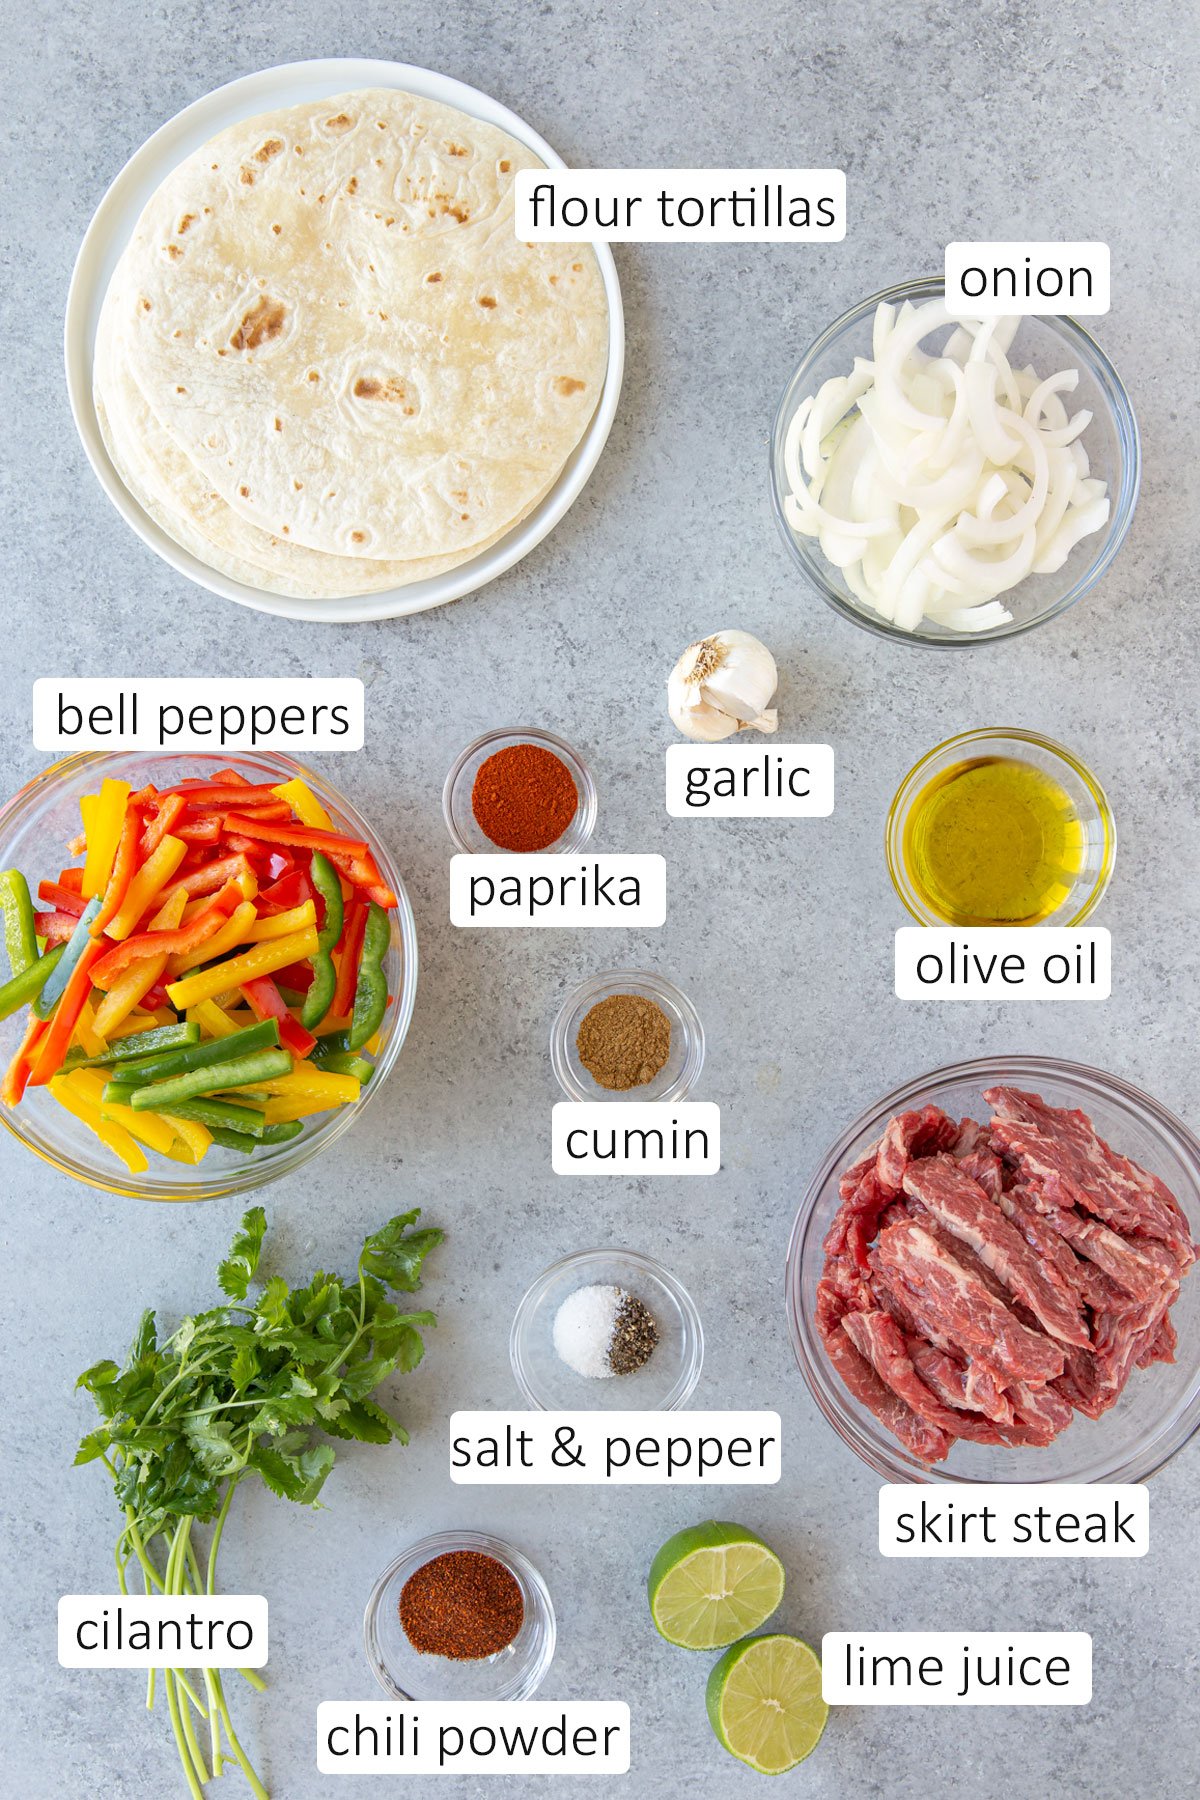 Overhead view of ingredients for fajitas on a gray surface.